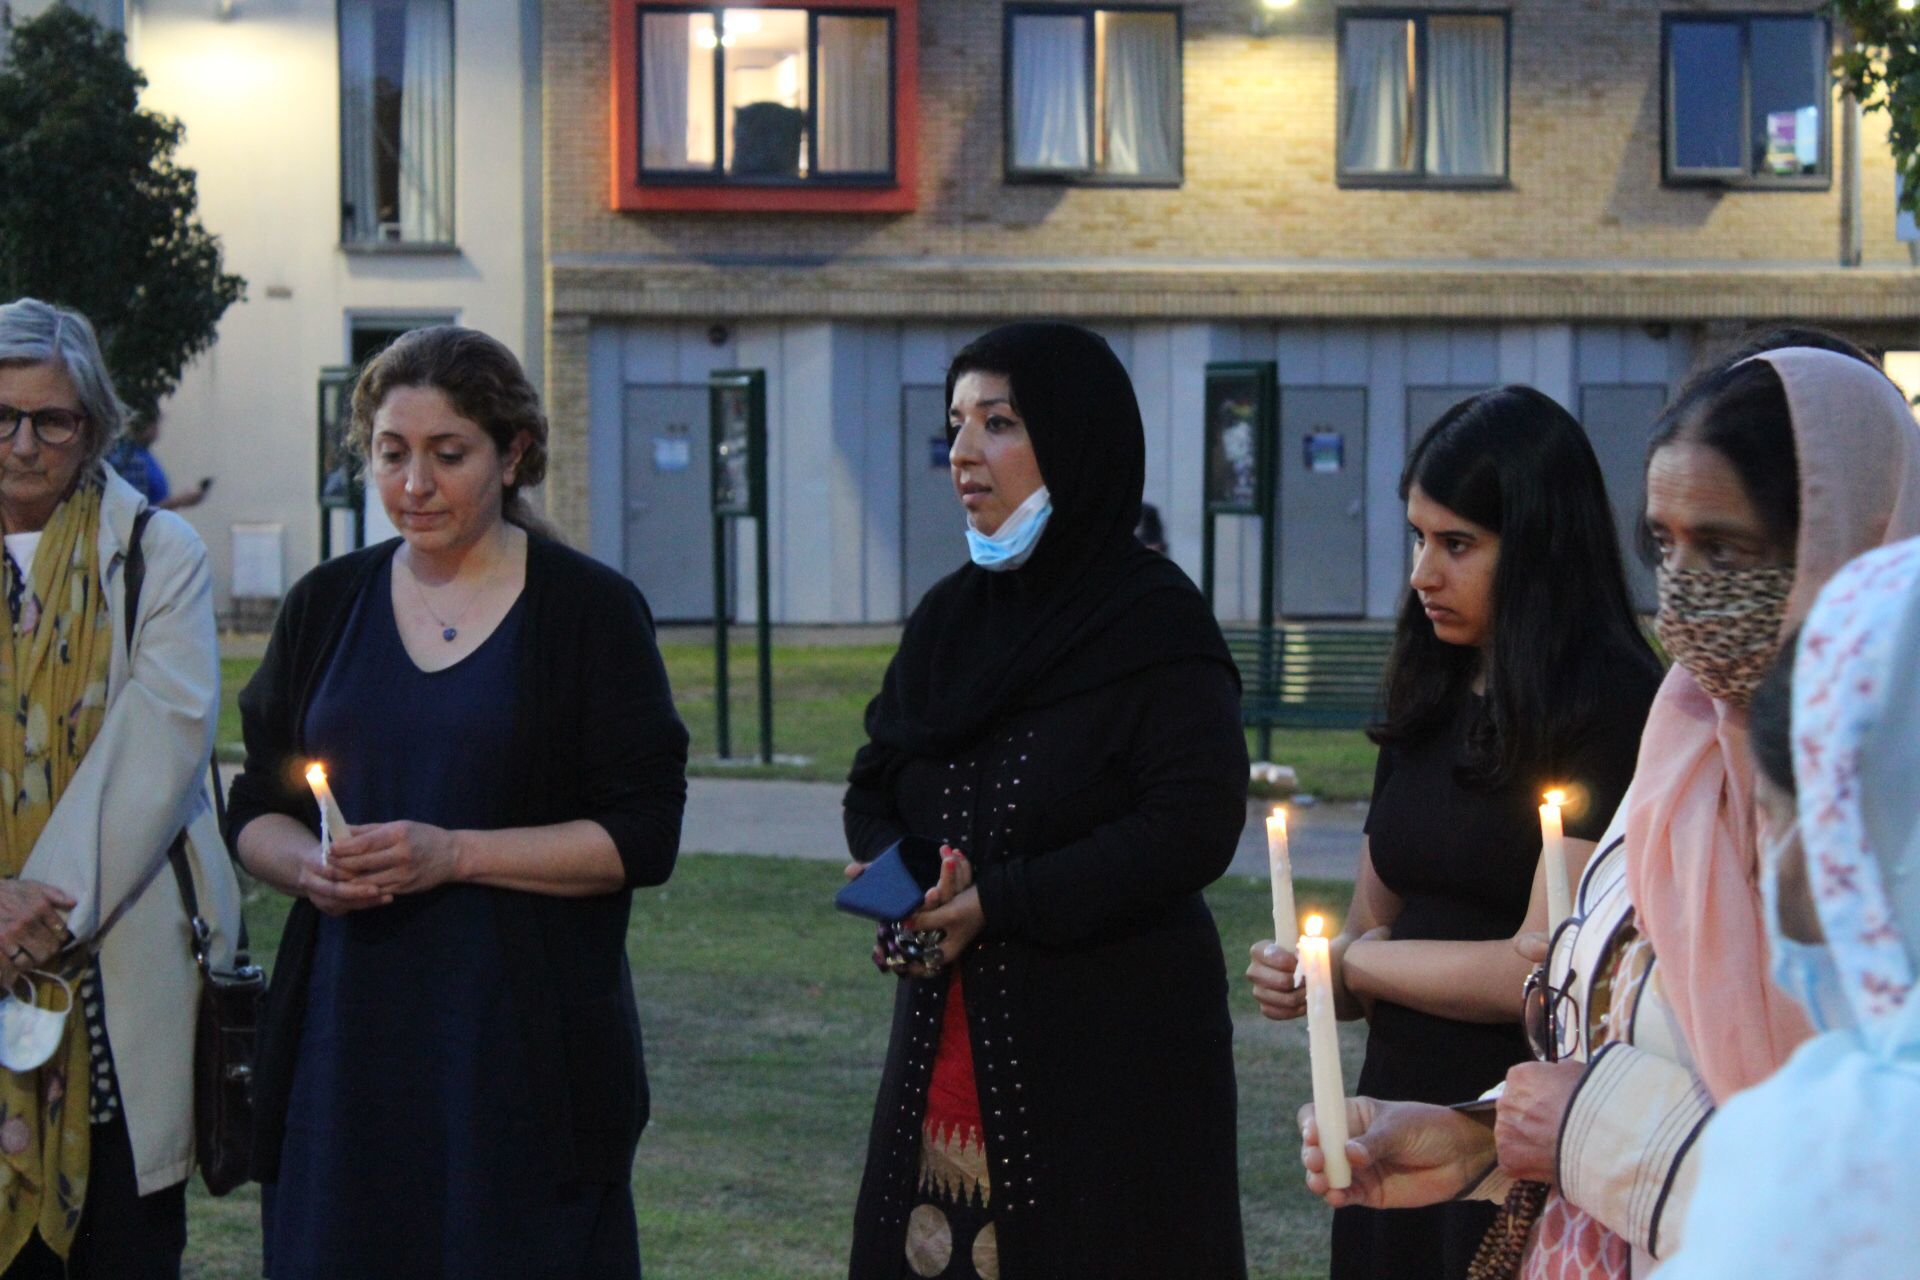 Centre, Cllr Lubna Arshad at the vigil for Sabina Nessa at Manzil Way Gardens, Oxford